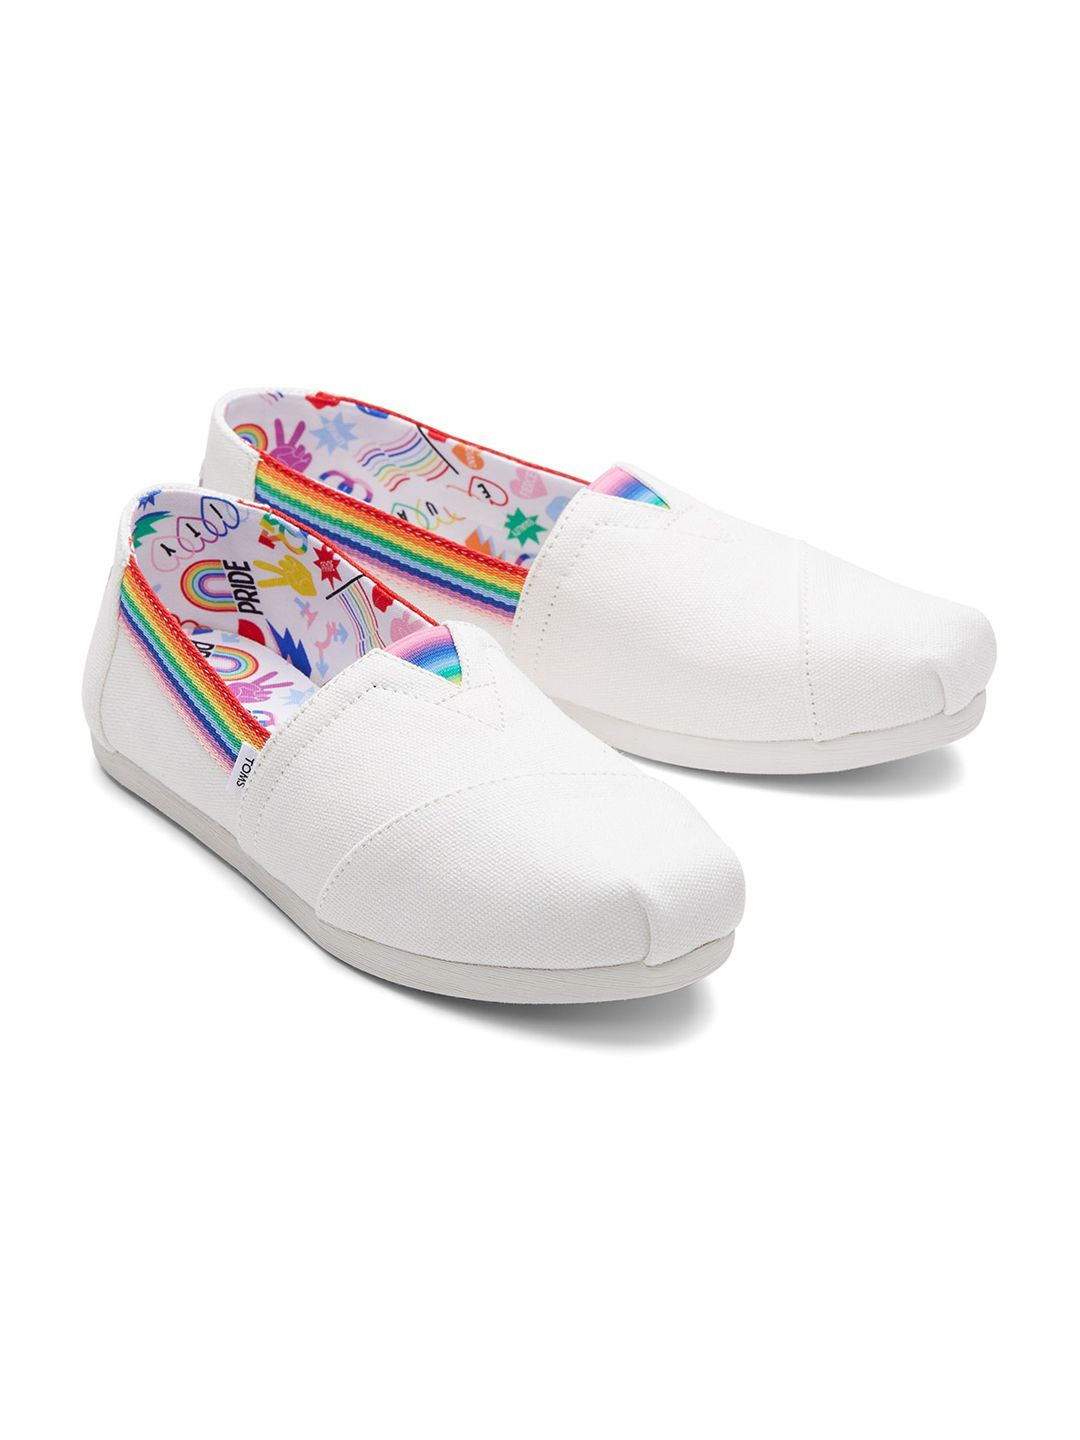 TOMS Women White Solid Slip-On Sneakers Price in India